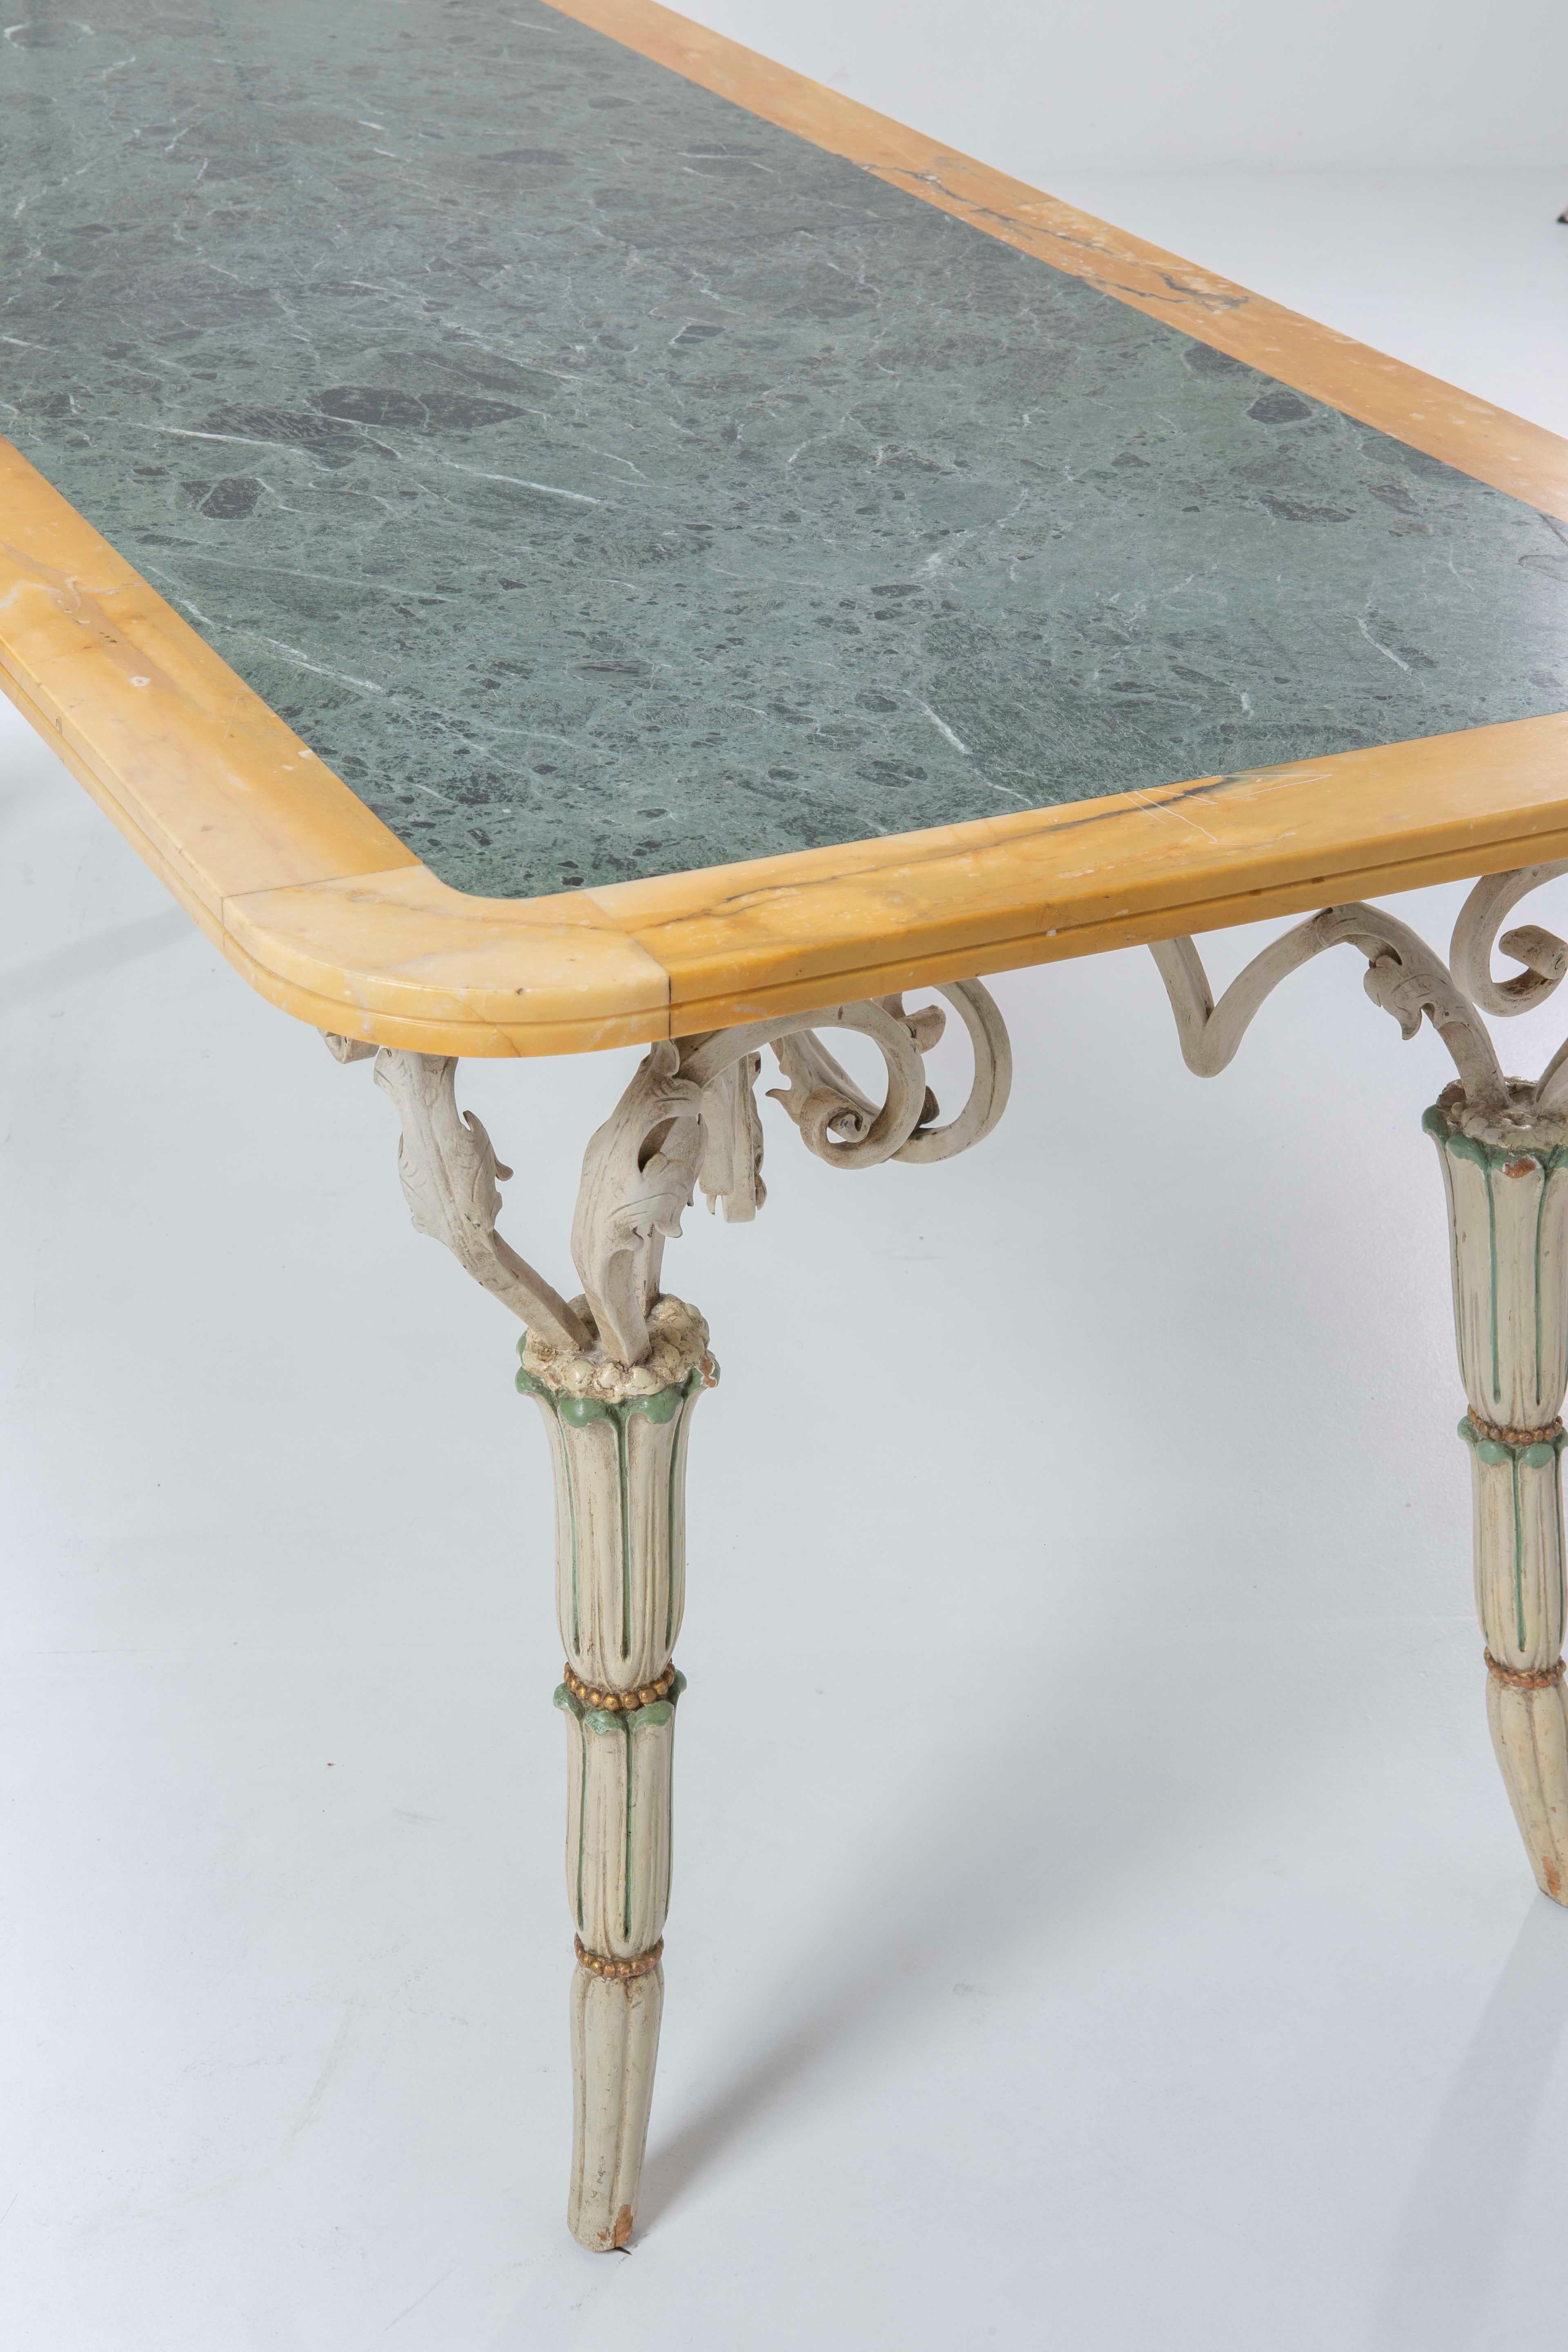 Tomaso Buzzi Marble dining table - 1954 Italian Design from a private commission For Sale 1